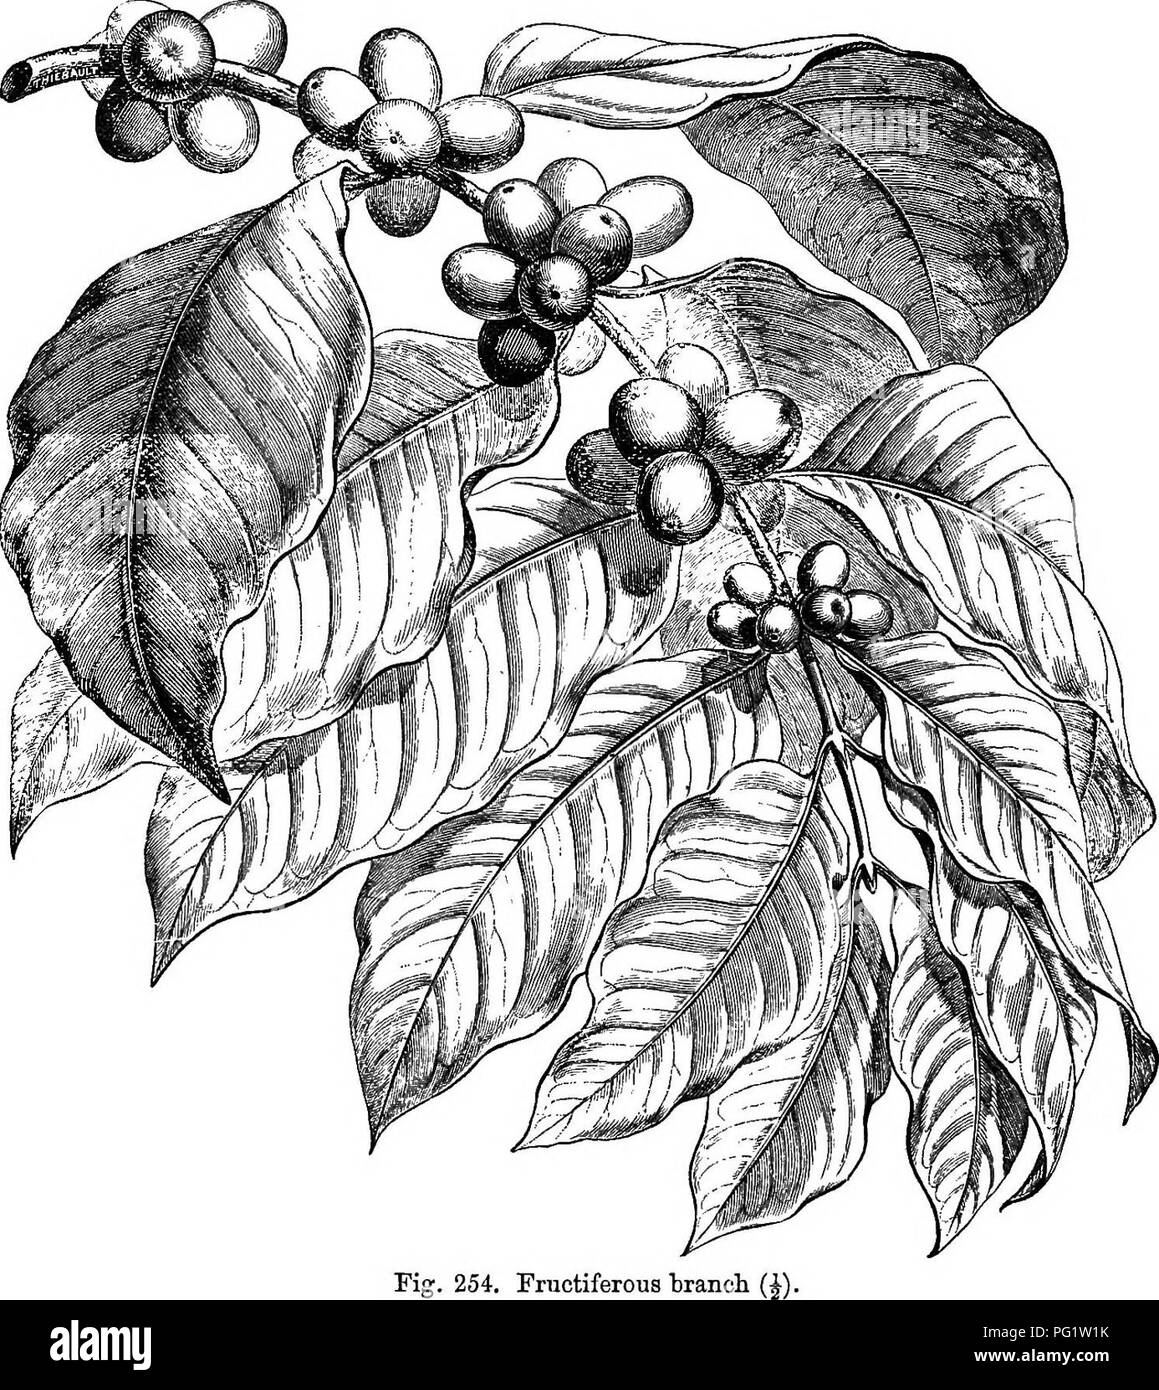 . The natural history of plants. Botany. 276 NATUBAL HISTOBY OF PLANTS. neut,' sometimes nil, and a hypocrateriform or infundibiiliform corolla, glabrous, or hairy in the throat, with a limb divided into four Coffea araliea.. Fig. 254. Fructiferous tranoh or five^ lobes twisted in the bud. The stamens,^ alternate, are composed of a filament, generally short, attached to the throat of the corolla or in the sinus of its divisions, and supports a dorsifixed V. 17, t. lbis 4.—B. H. Gen. ii. 114, n. 238.— covering the top of the bud and secreted in Batcee, Fl. Mauril. 152.—Cqfe Eay, Mist. PI. atund Stock Photo